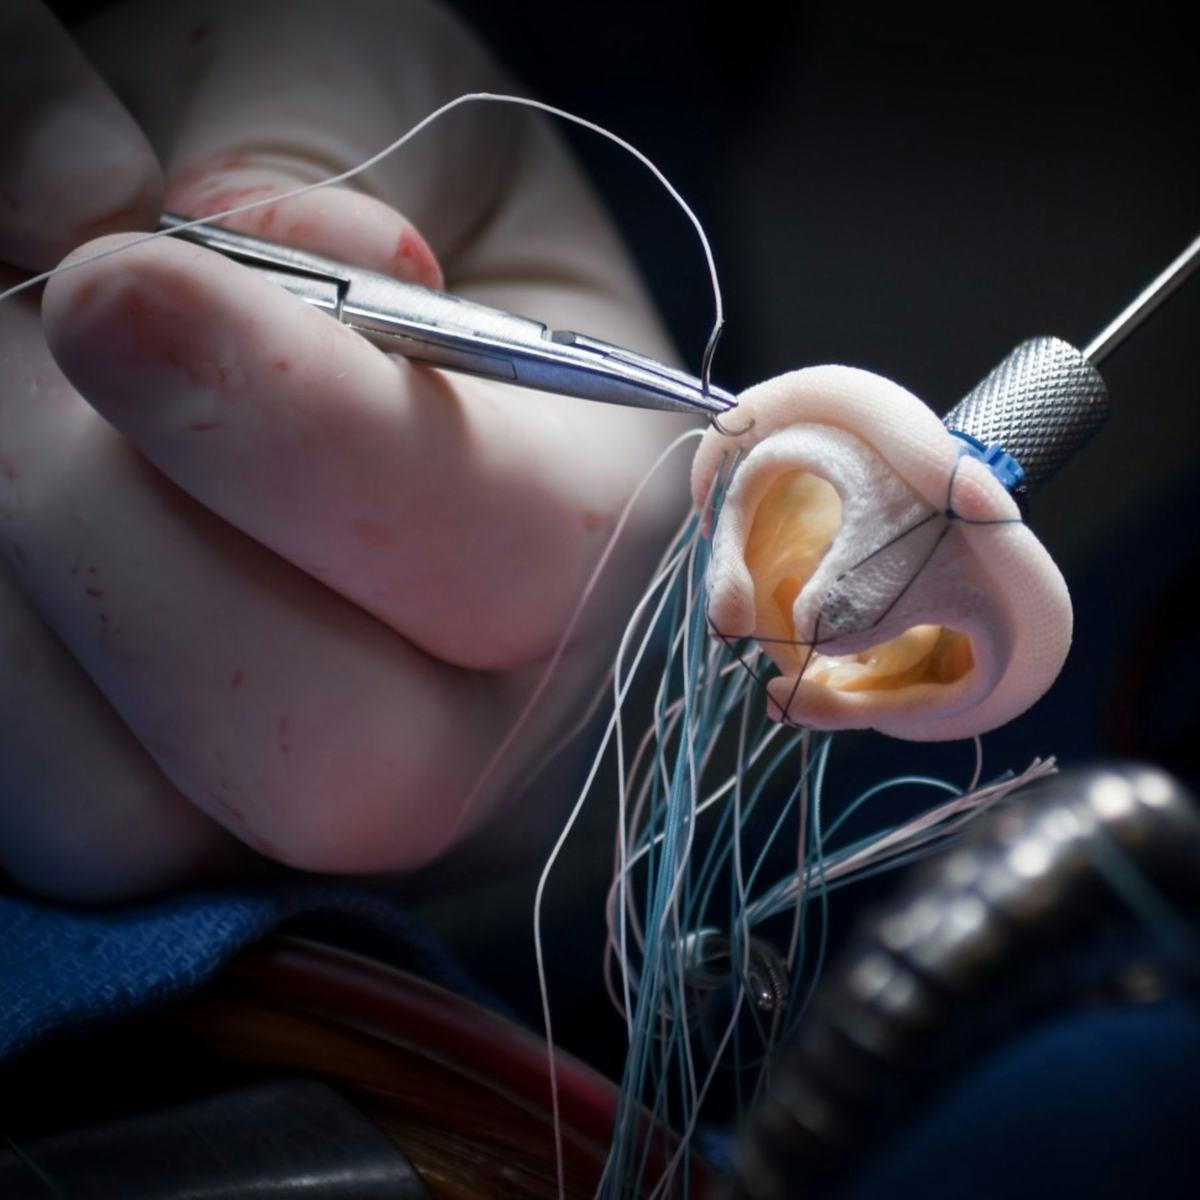 A photo of a medical implant during surgery